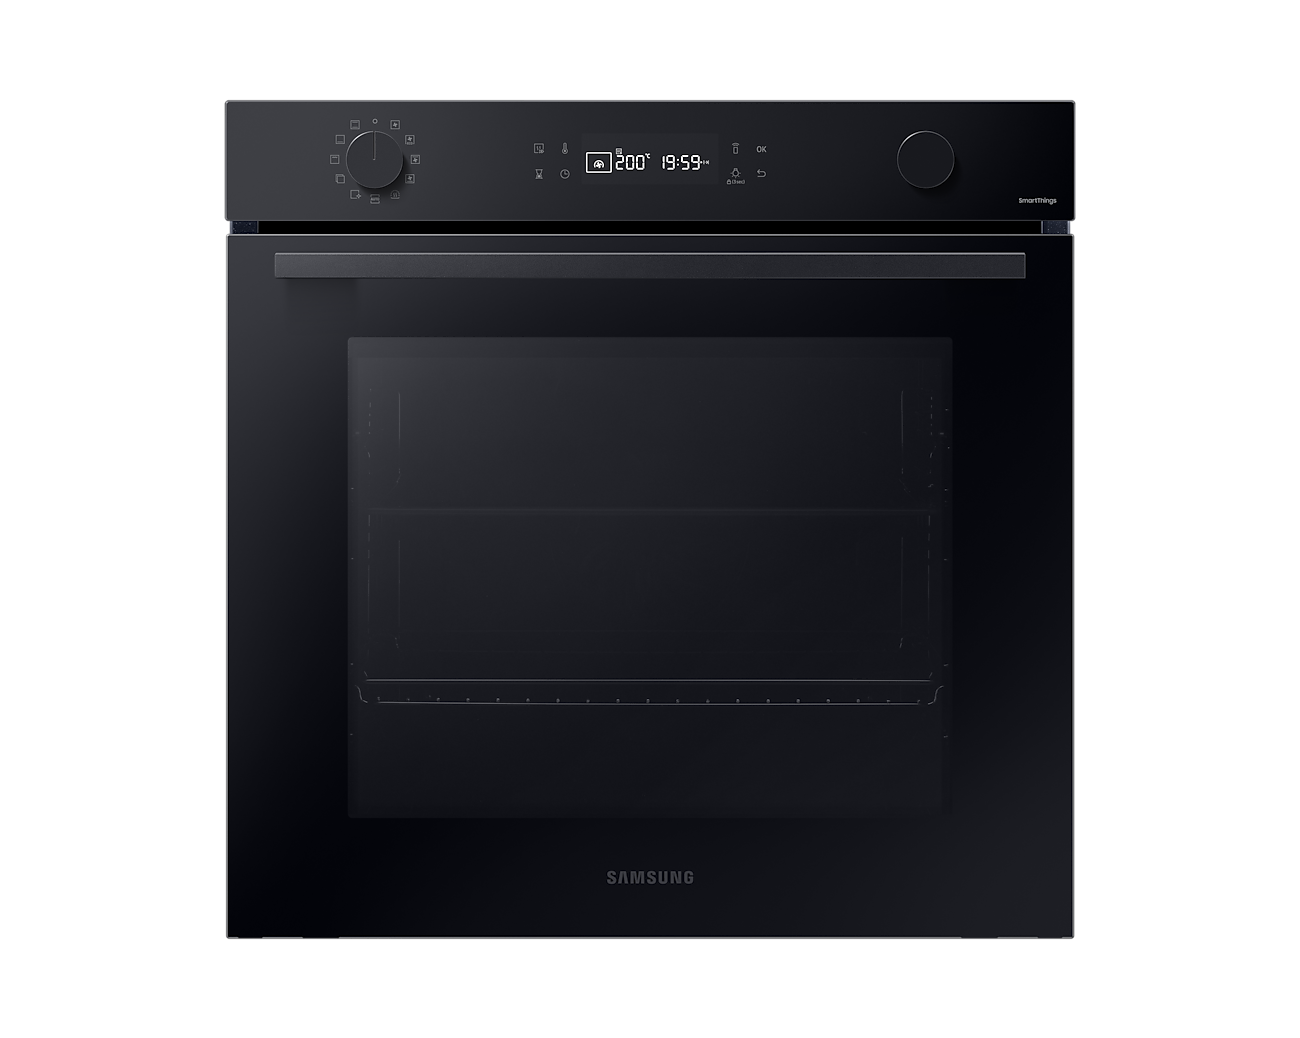 Samsung NV7B41307AK Series 4 Smart Oven with Pyrolytic Cleaning